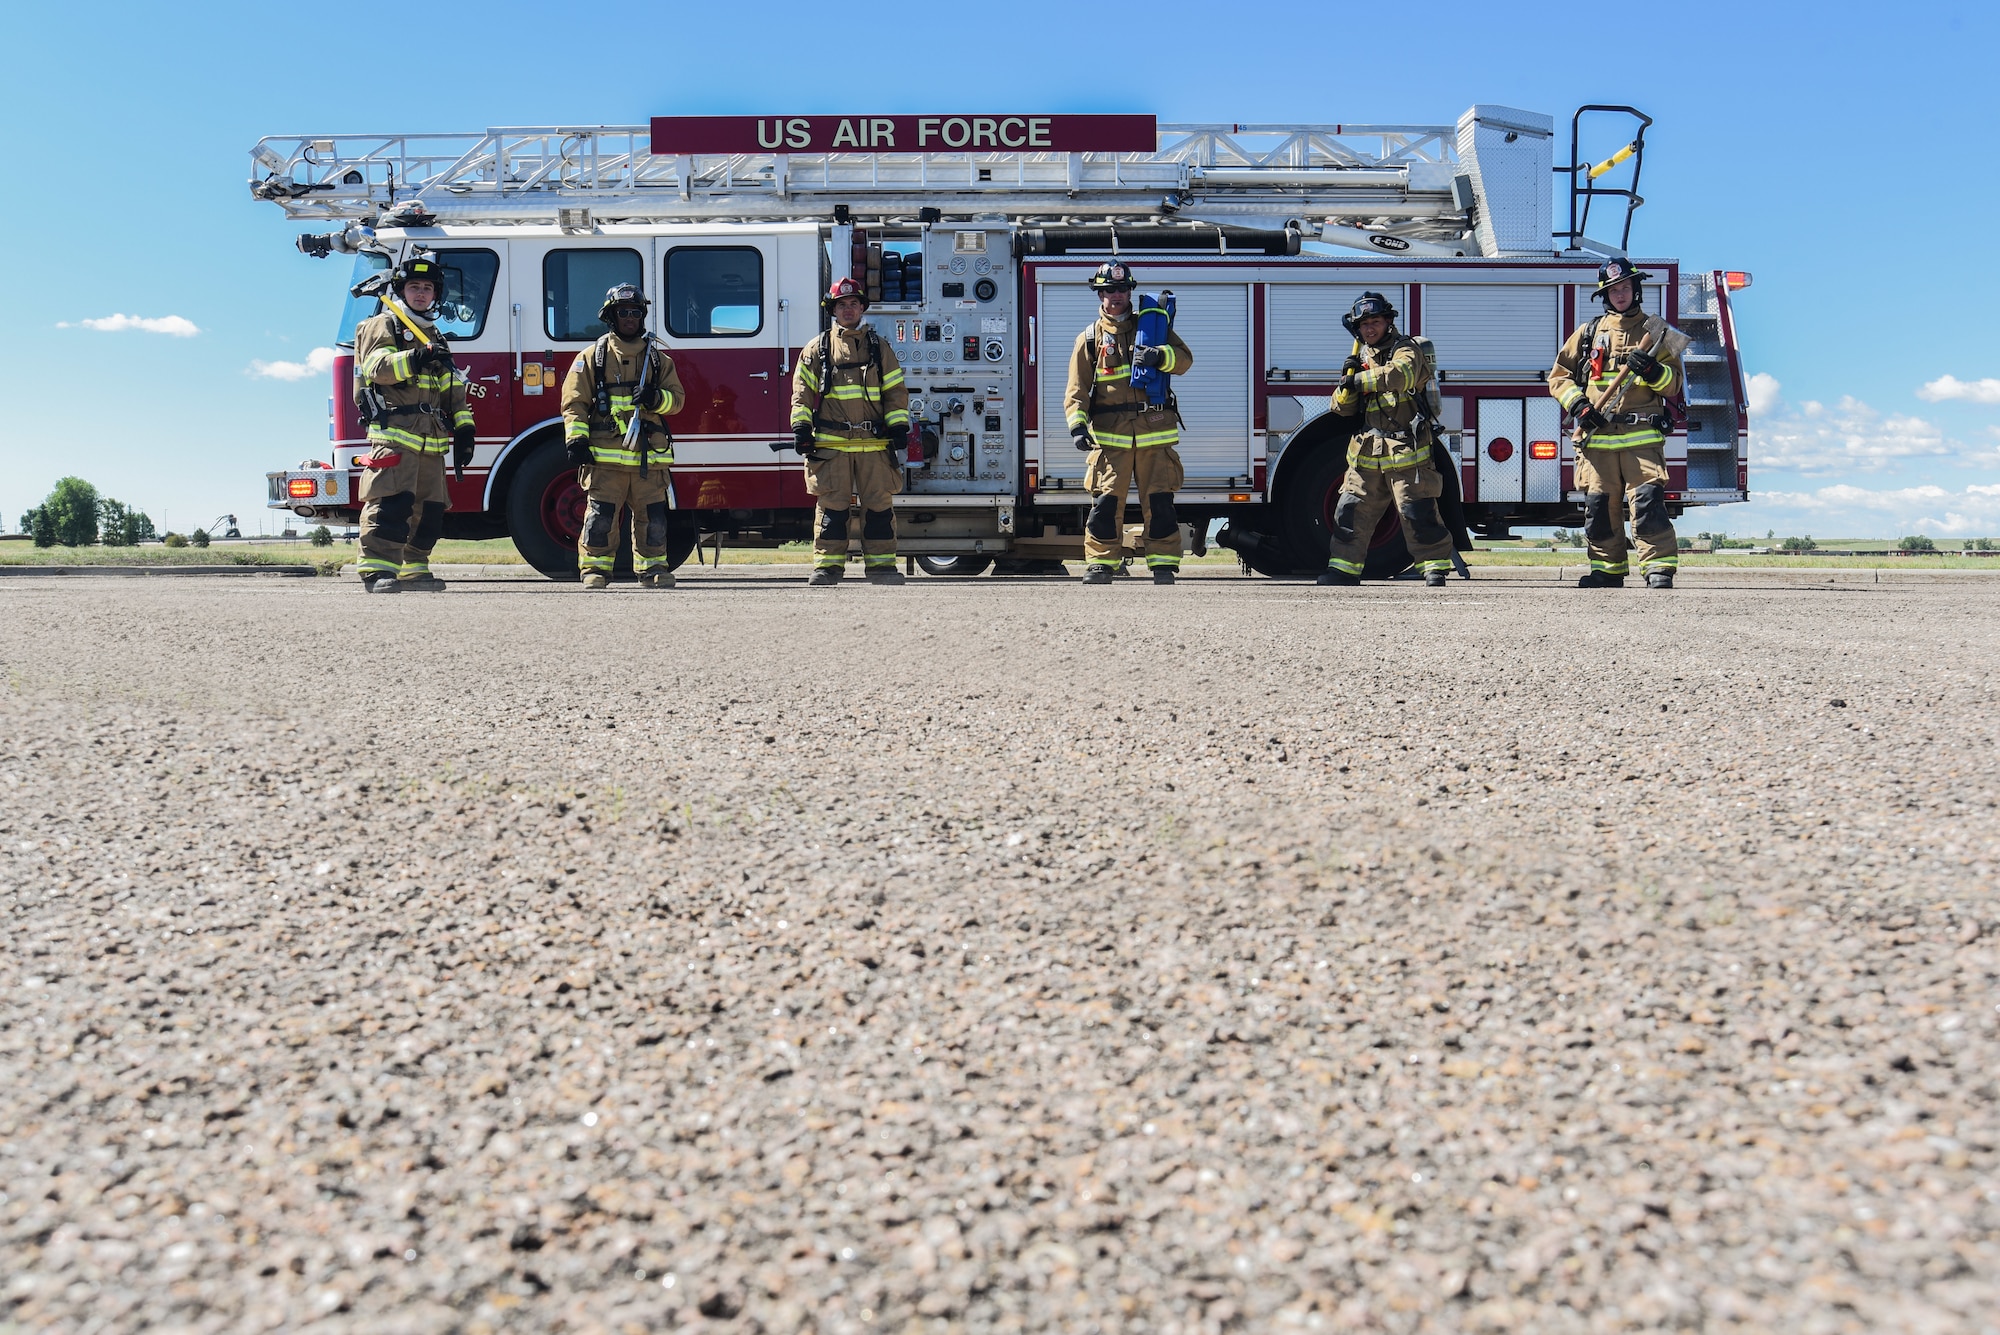 Airmen from the F.E. Warren Fire and Emergency Services gear up for training with fire resistant clothing, oxygen tanks and fire axes, June 18, 2018 at F.E. Warren Air Force Base, Wyo. In 2010 the F.E. Warren fire department began the Commission on Fire Accreditation International accreditation process and first achieved it in 2014. (U.S. Air Force photo by Airman 1st Class Abbigayle Williams)